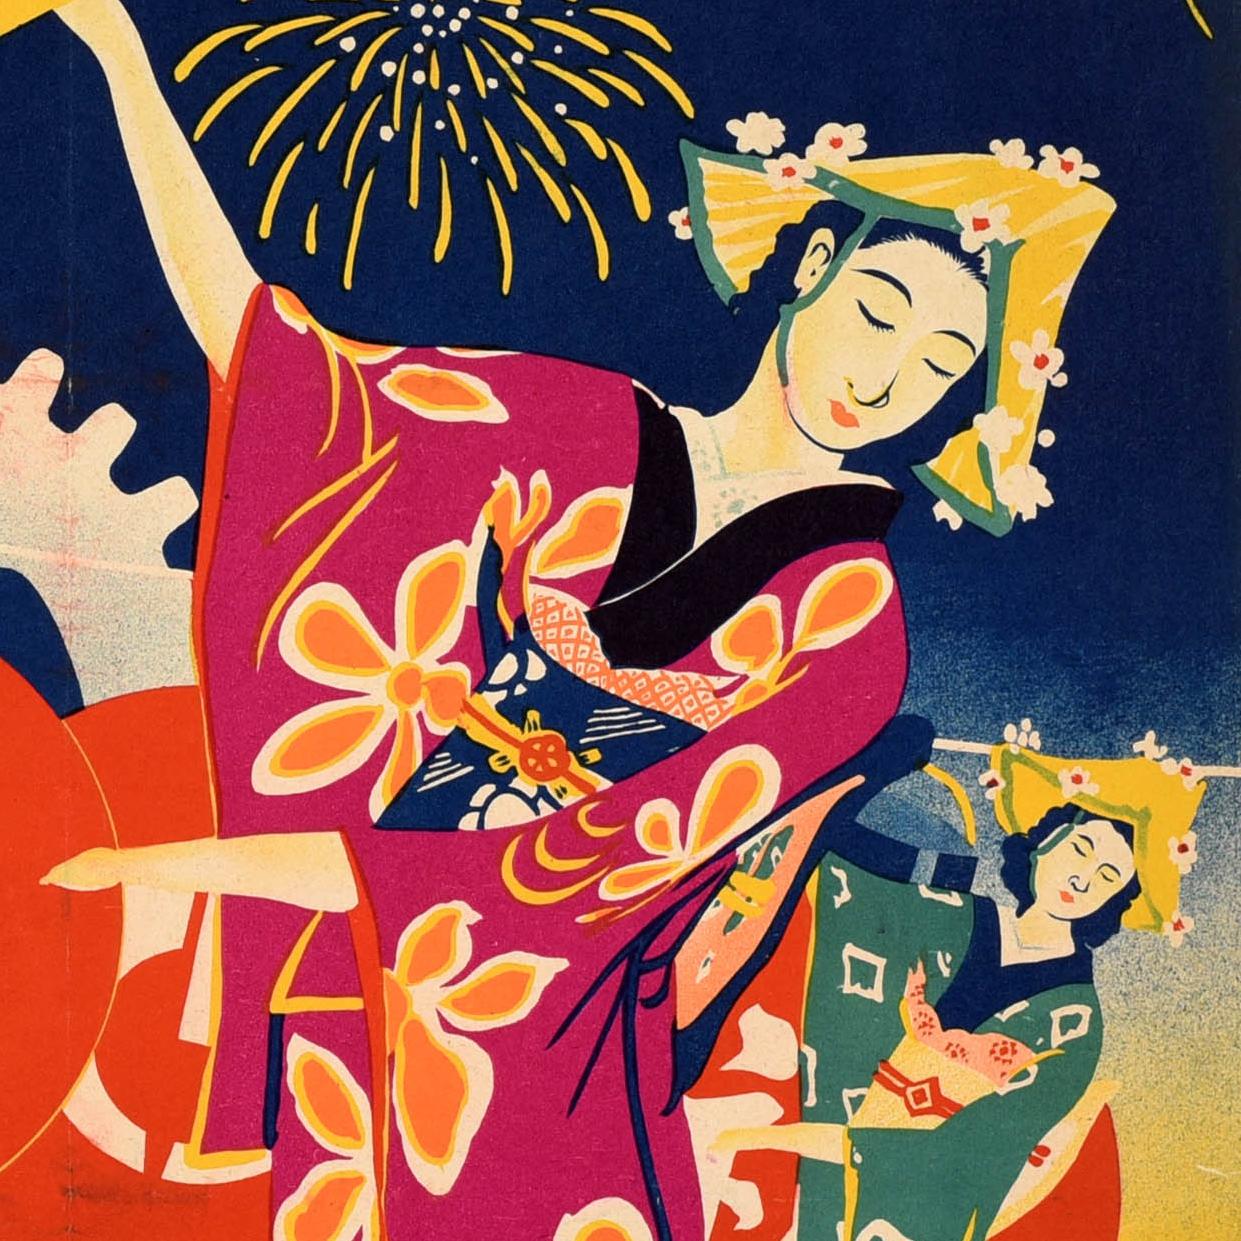 Original vintage poster advertising the Onoda City Industrial Festival featuring colourful artwork depicting ladies in traditional Japanese dress with flowers in their hats dancing by red lanterns with fireworks in the background, the title text in